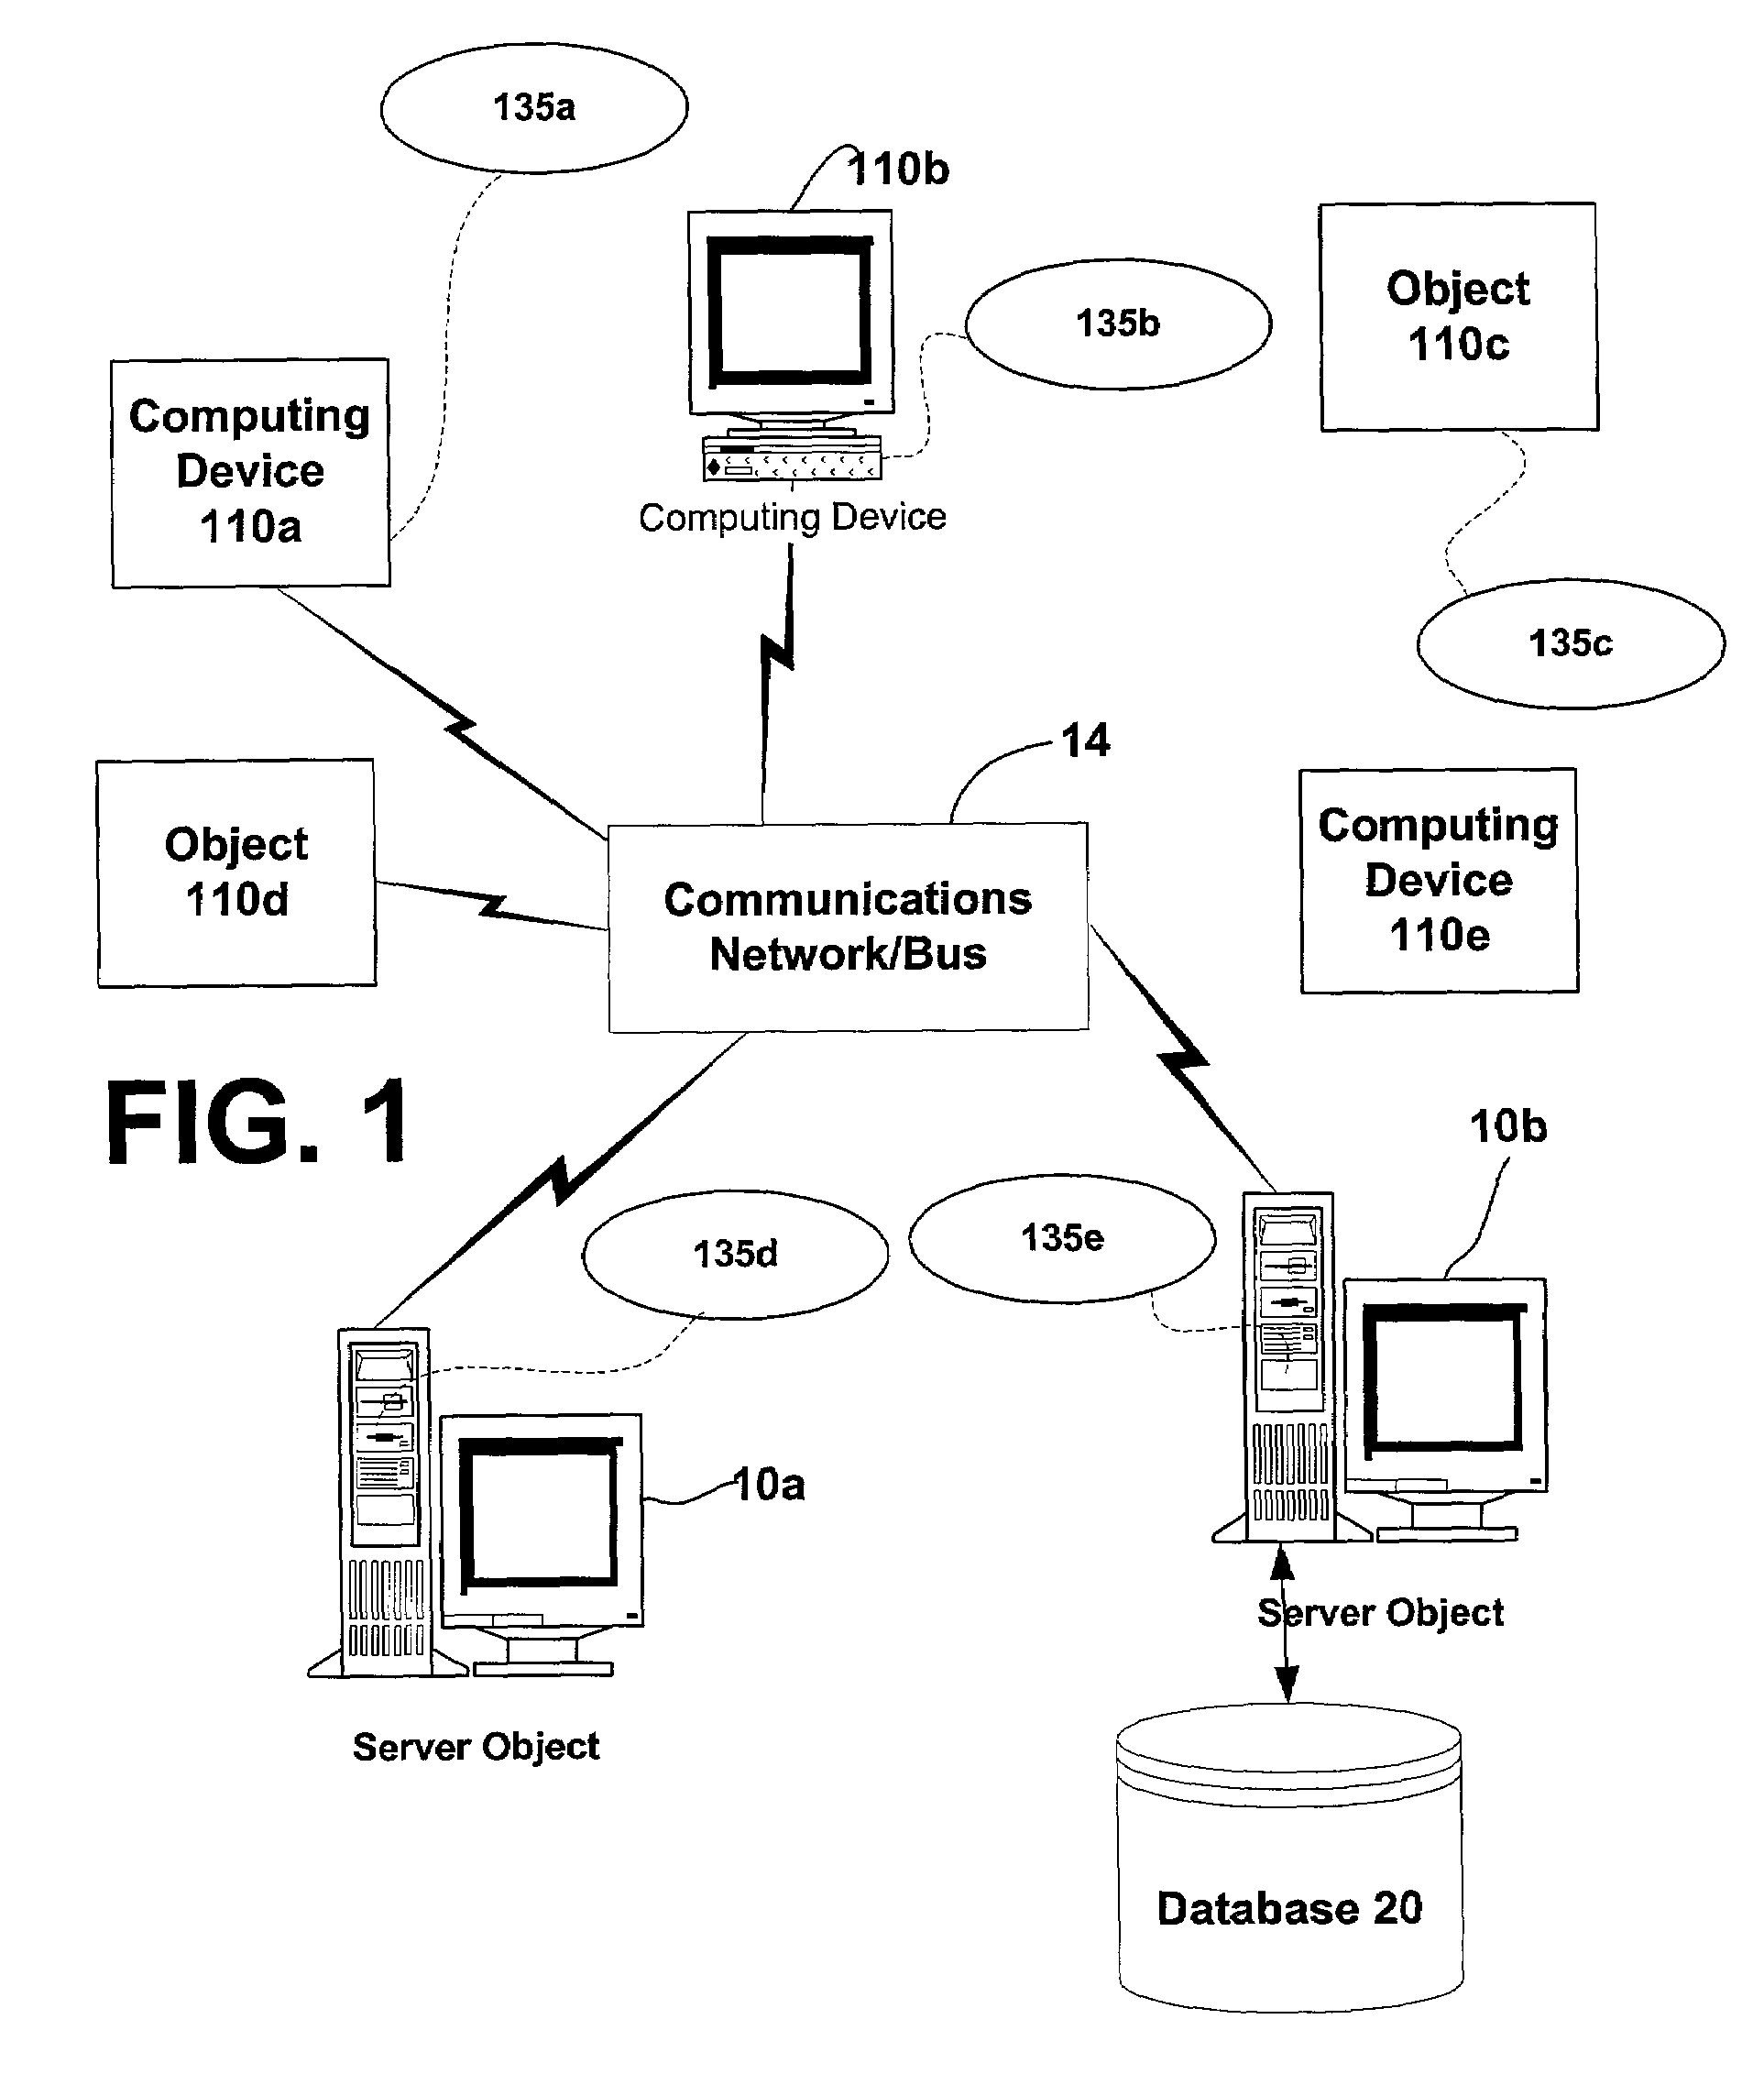 Systems and methods for managing drivers in a computing system